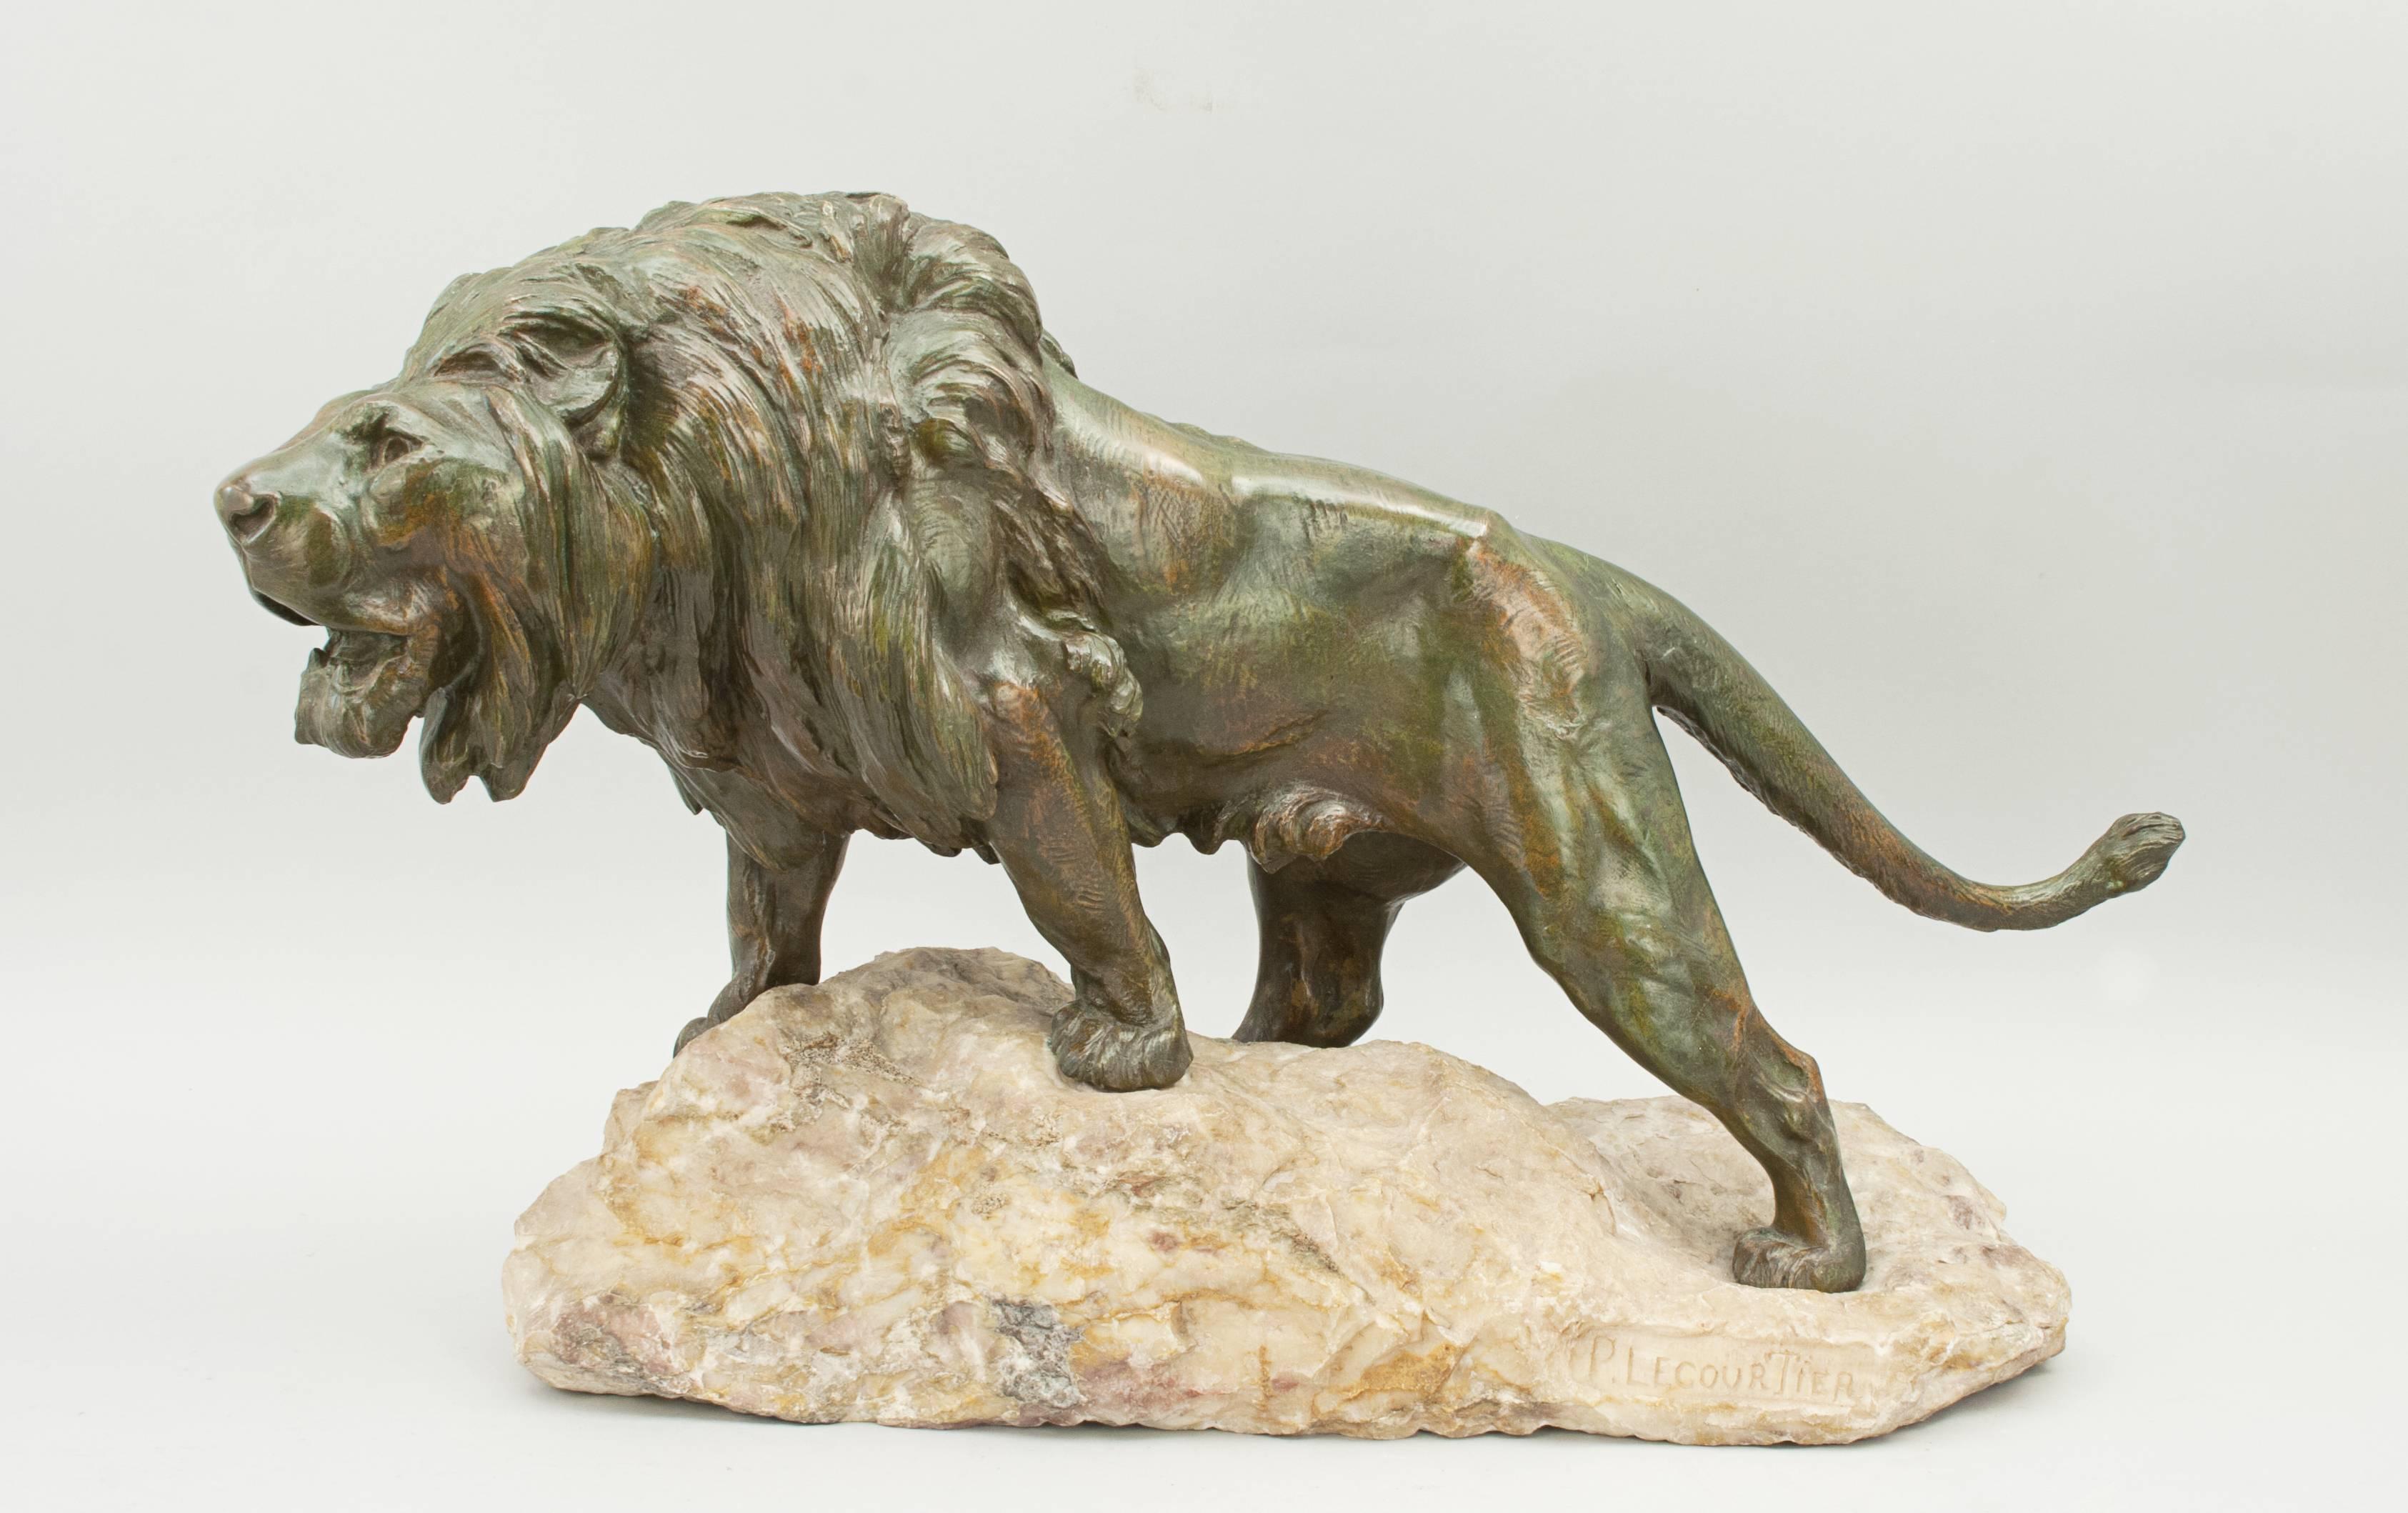 Bronze sculpture by Lecourtier.
A fantastic large bronze sculpture of a roaring lion. The impressive lion is finished in verdigris with wonderful patina and mounted onto a stone base which is signed by the artist 'P. Lecourtier'. The lion has been